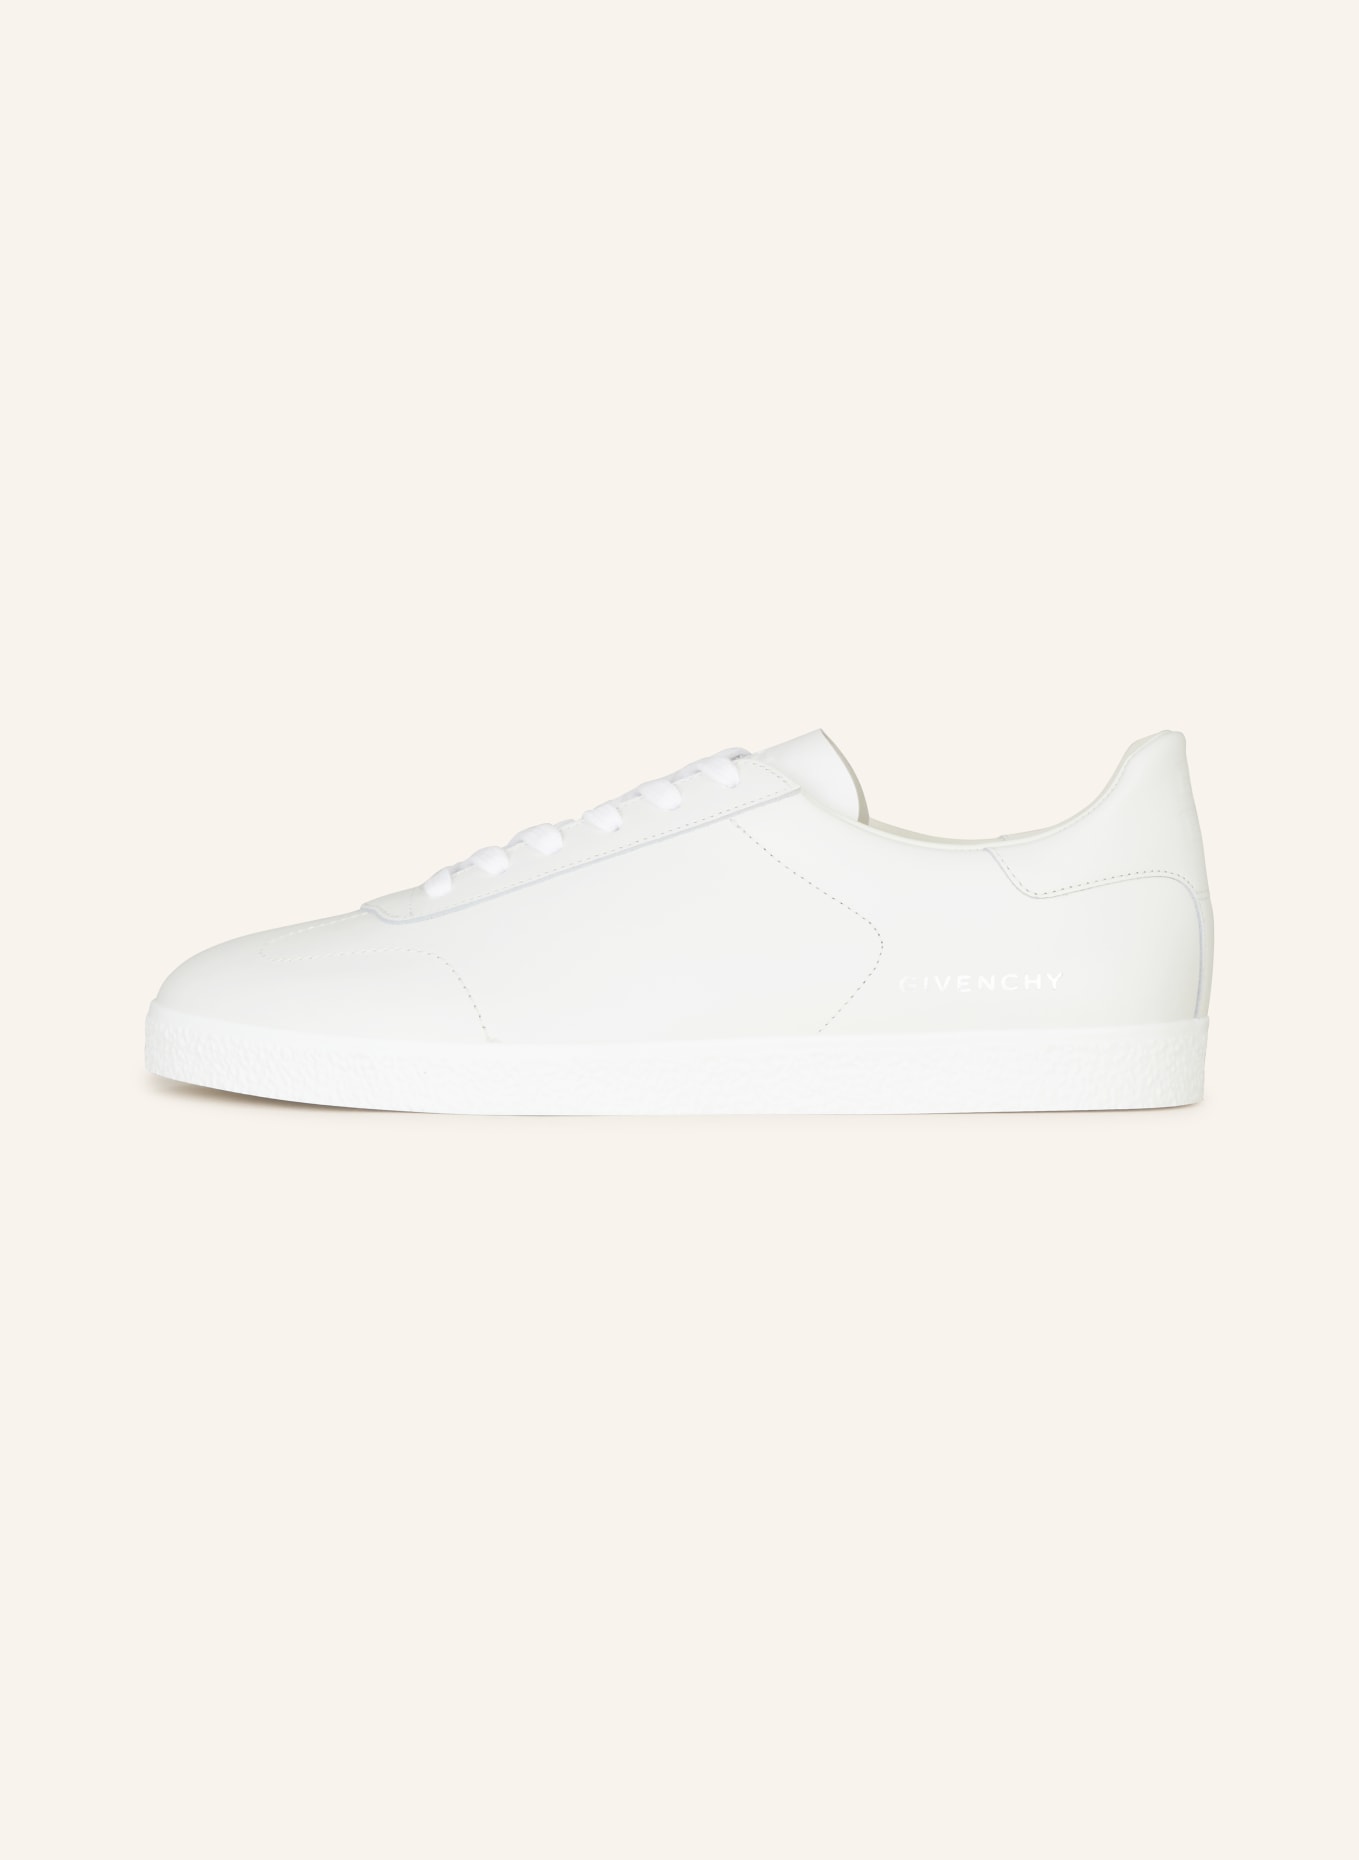 GIVENCHY Sneaker TOWN, Farbe: WEISS (Bild 4)